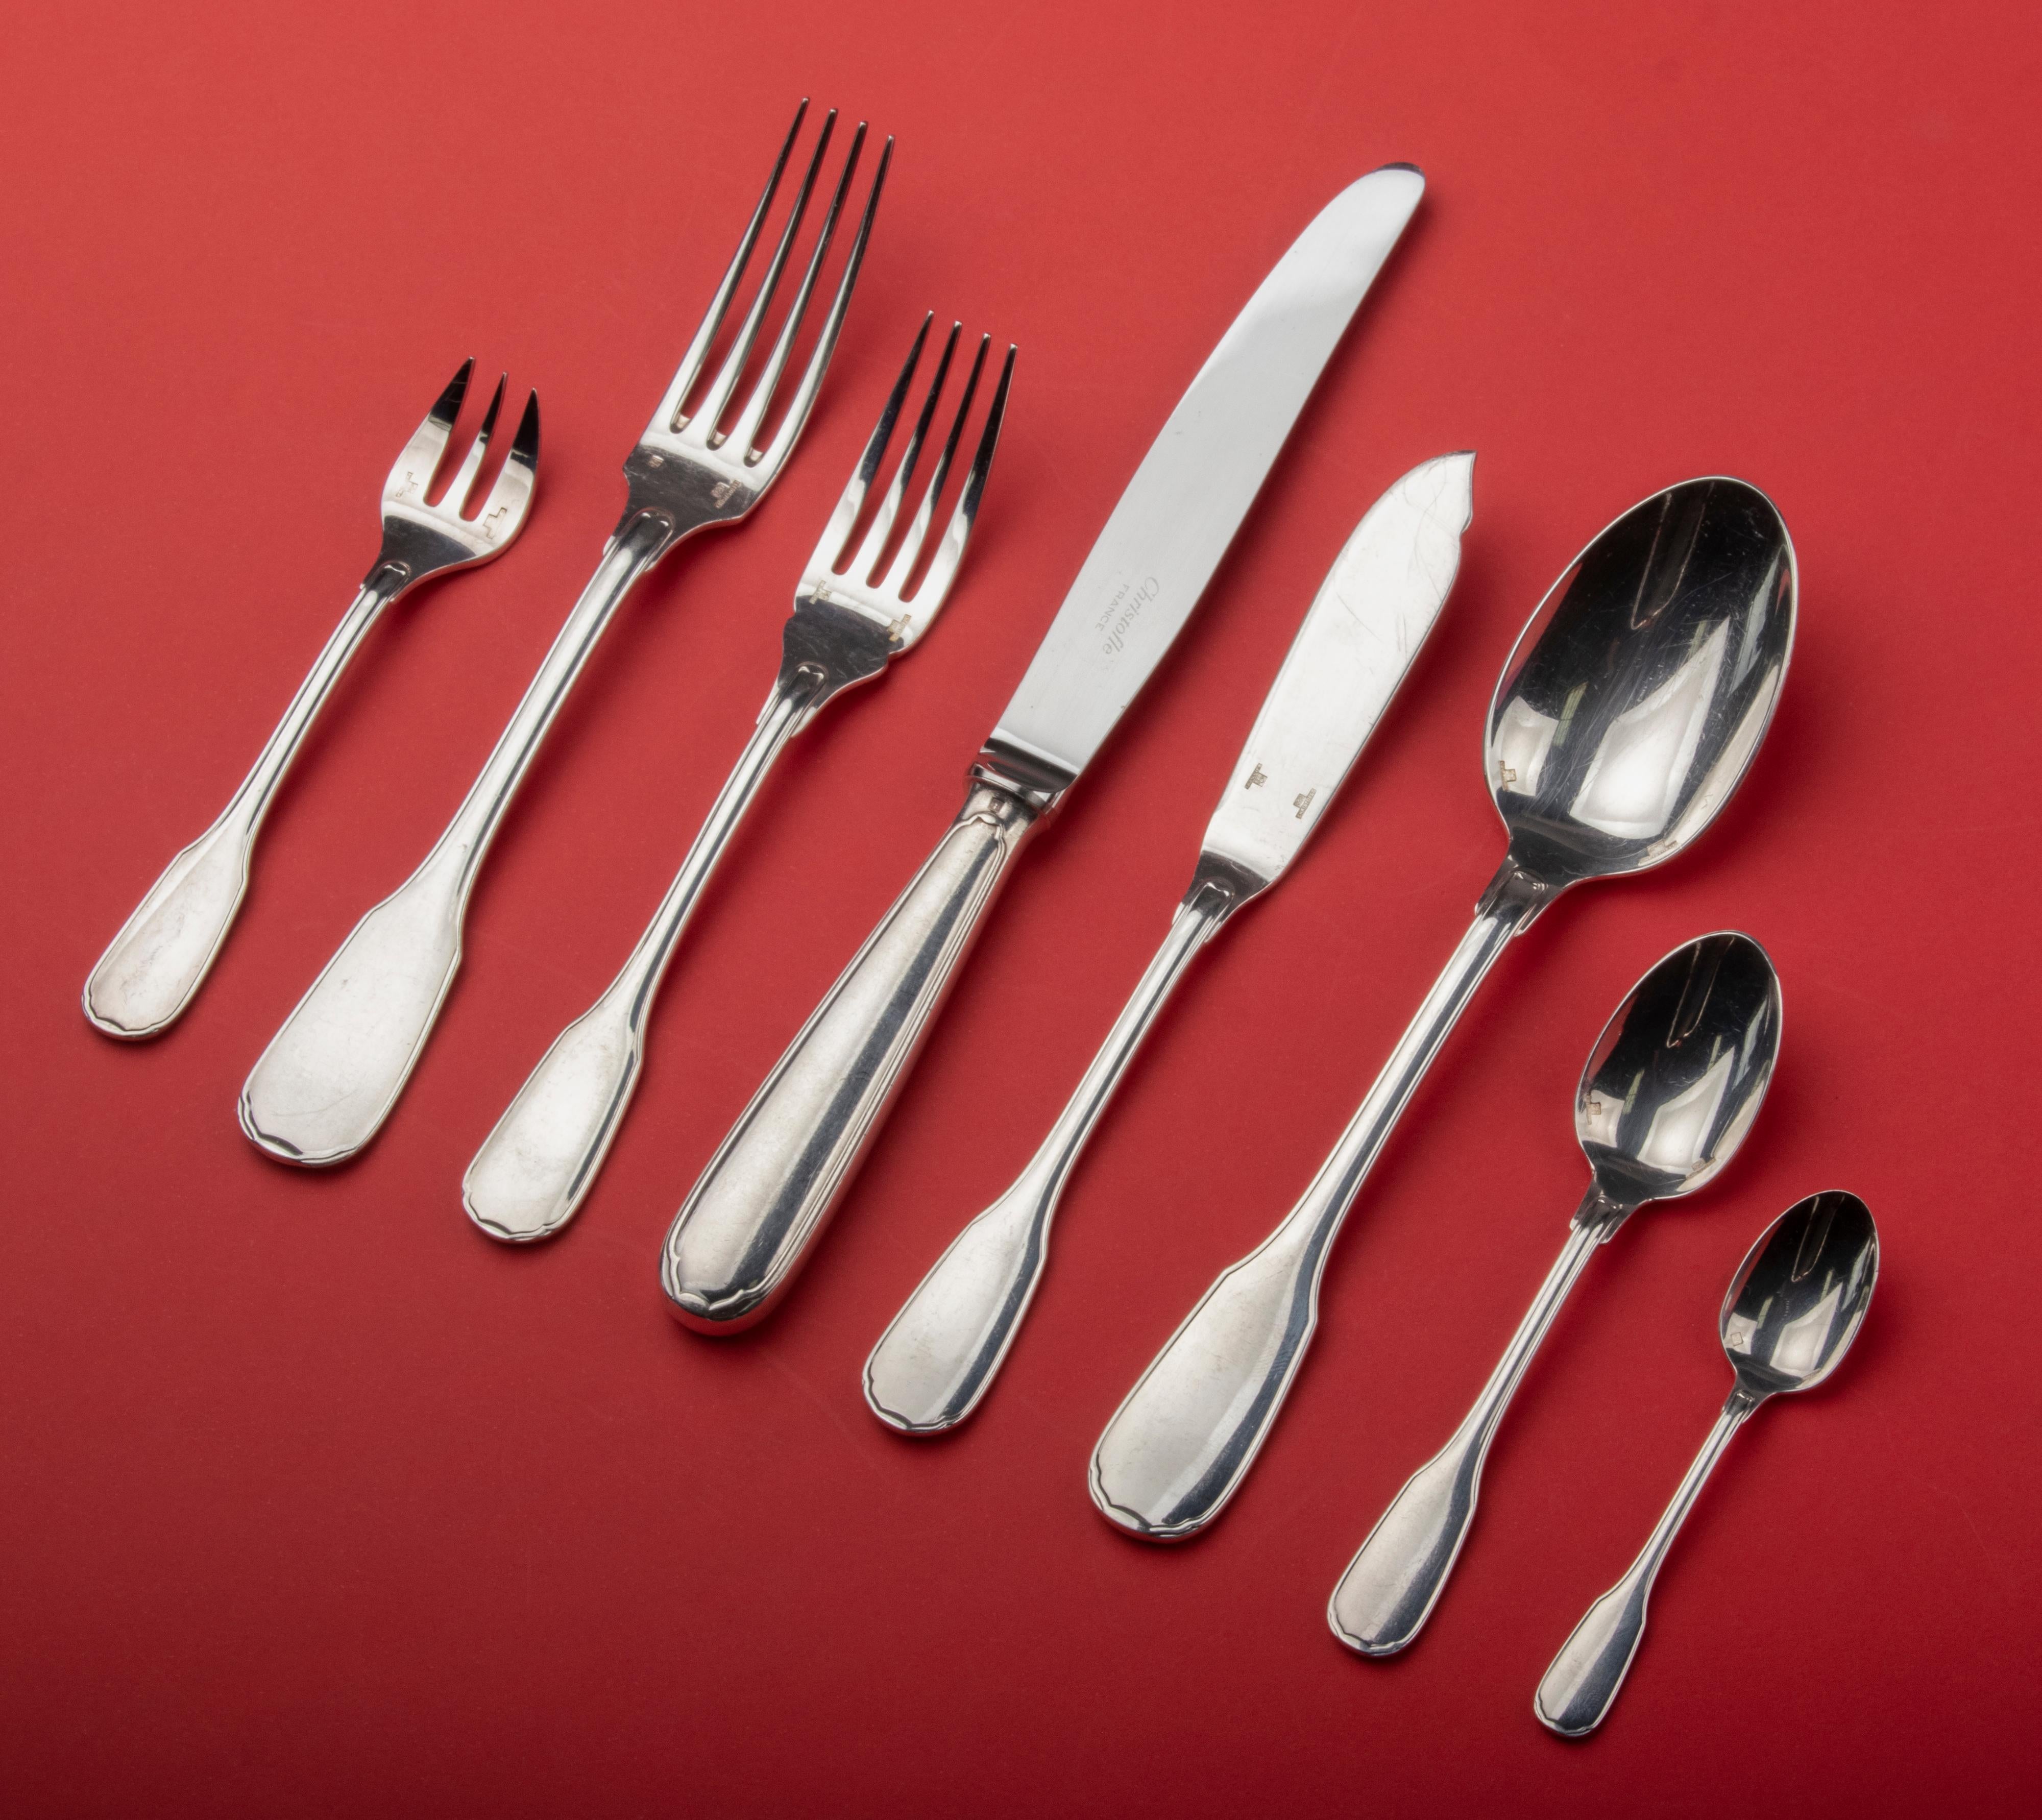 Silver plated table cutlery for 6 persons from the French brand Chriostofle. The model's name is Versailles. This is a timeless and classic design that will suit almost any table setting. The set is composed as follows: 6 table forks, 6 table